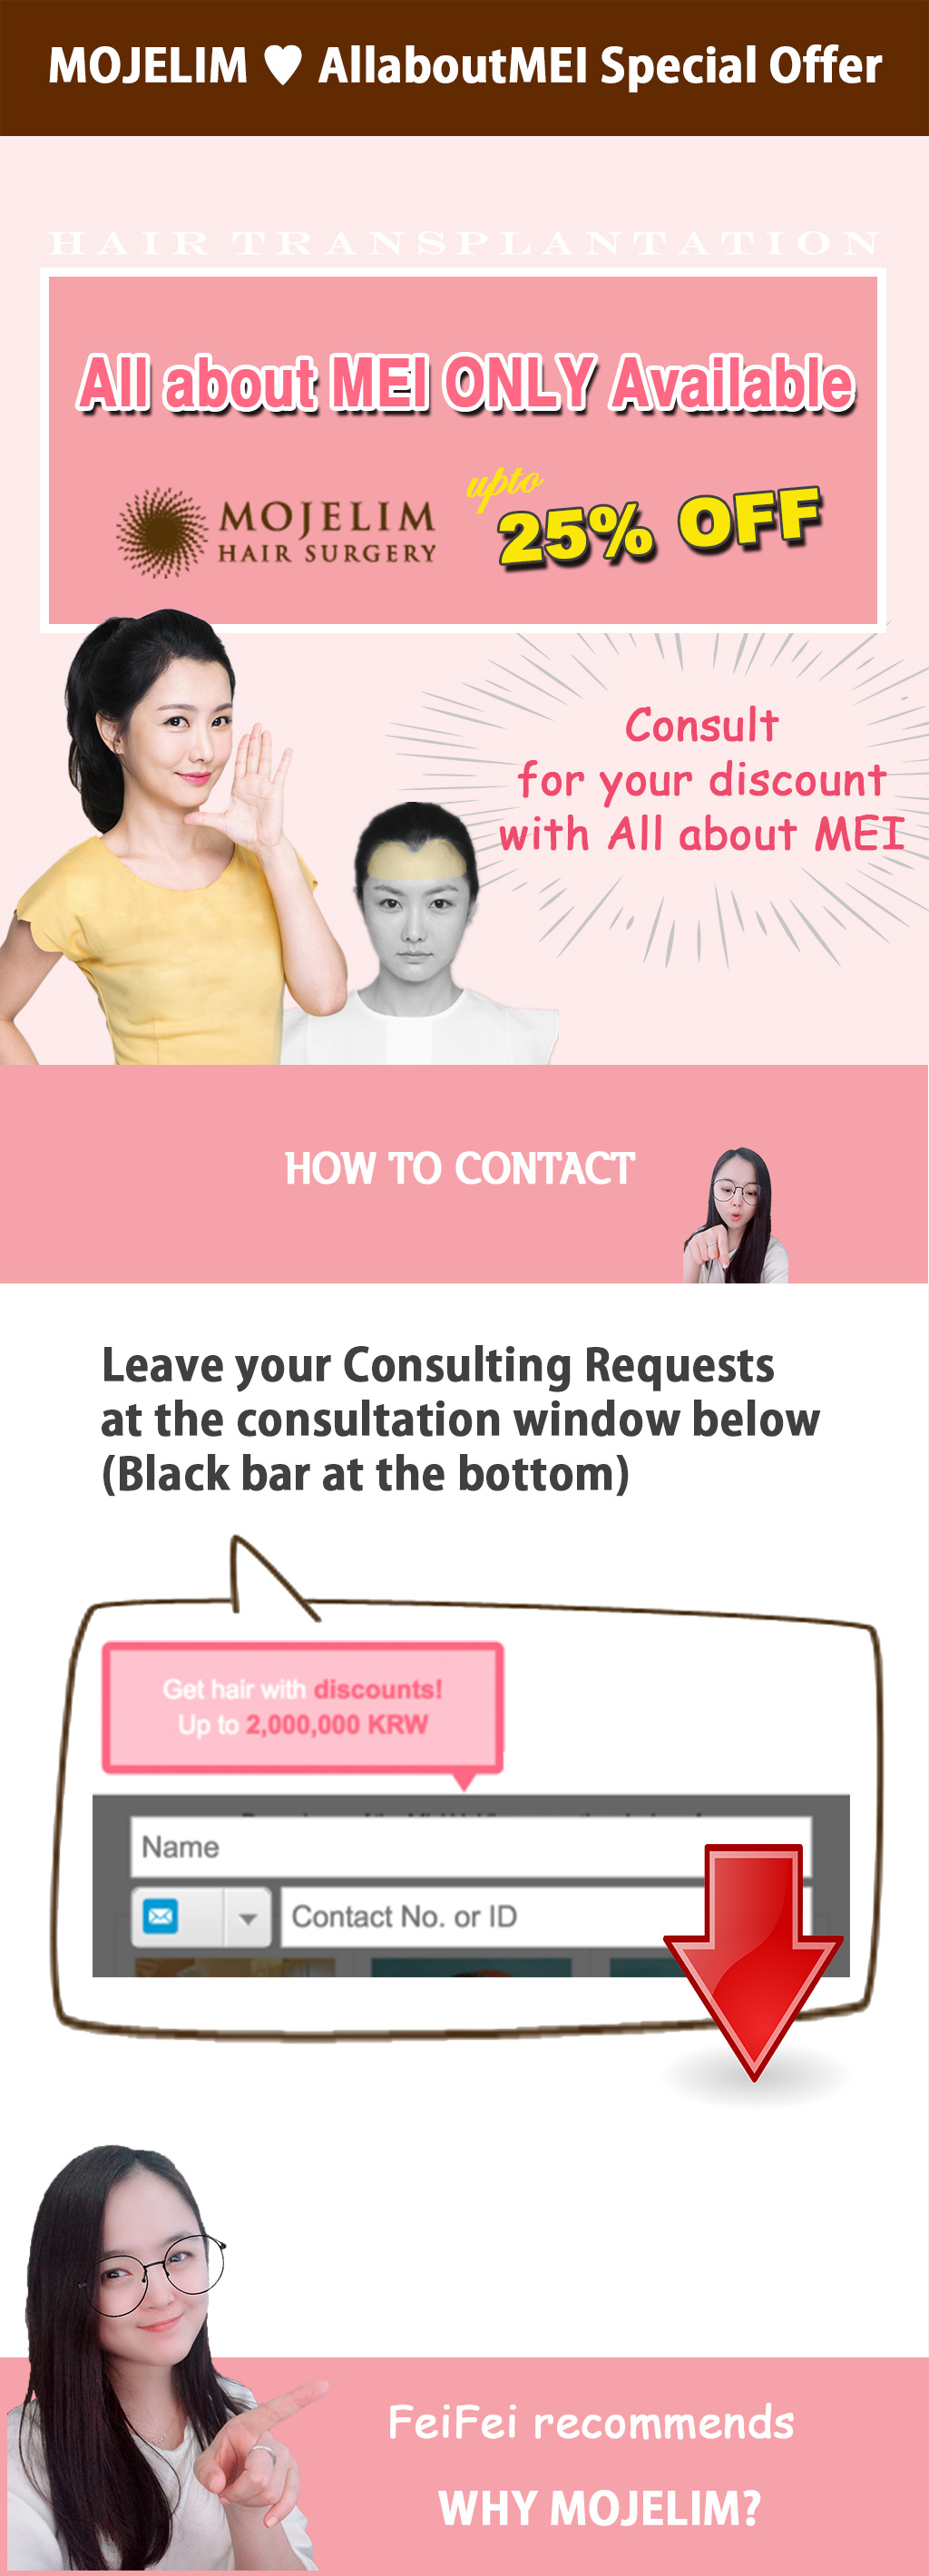 MOJELIM hair surgery x AllaboutMEI special offer / promotion / the lowest price in AllaboutMEI